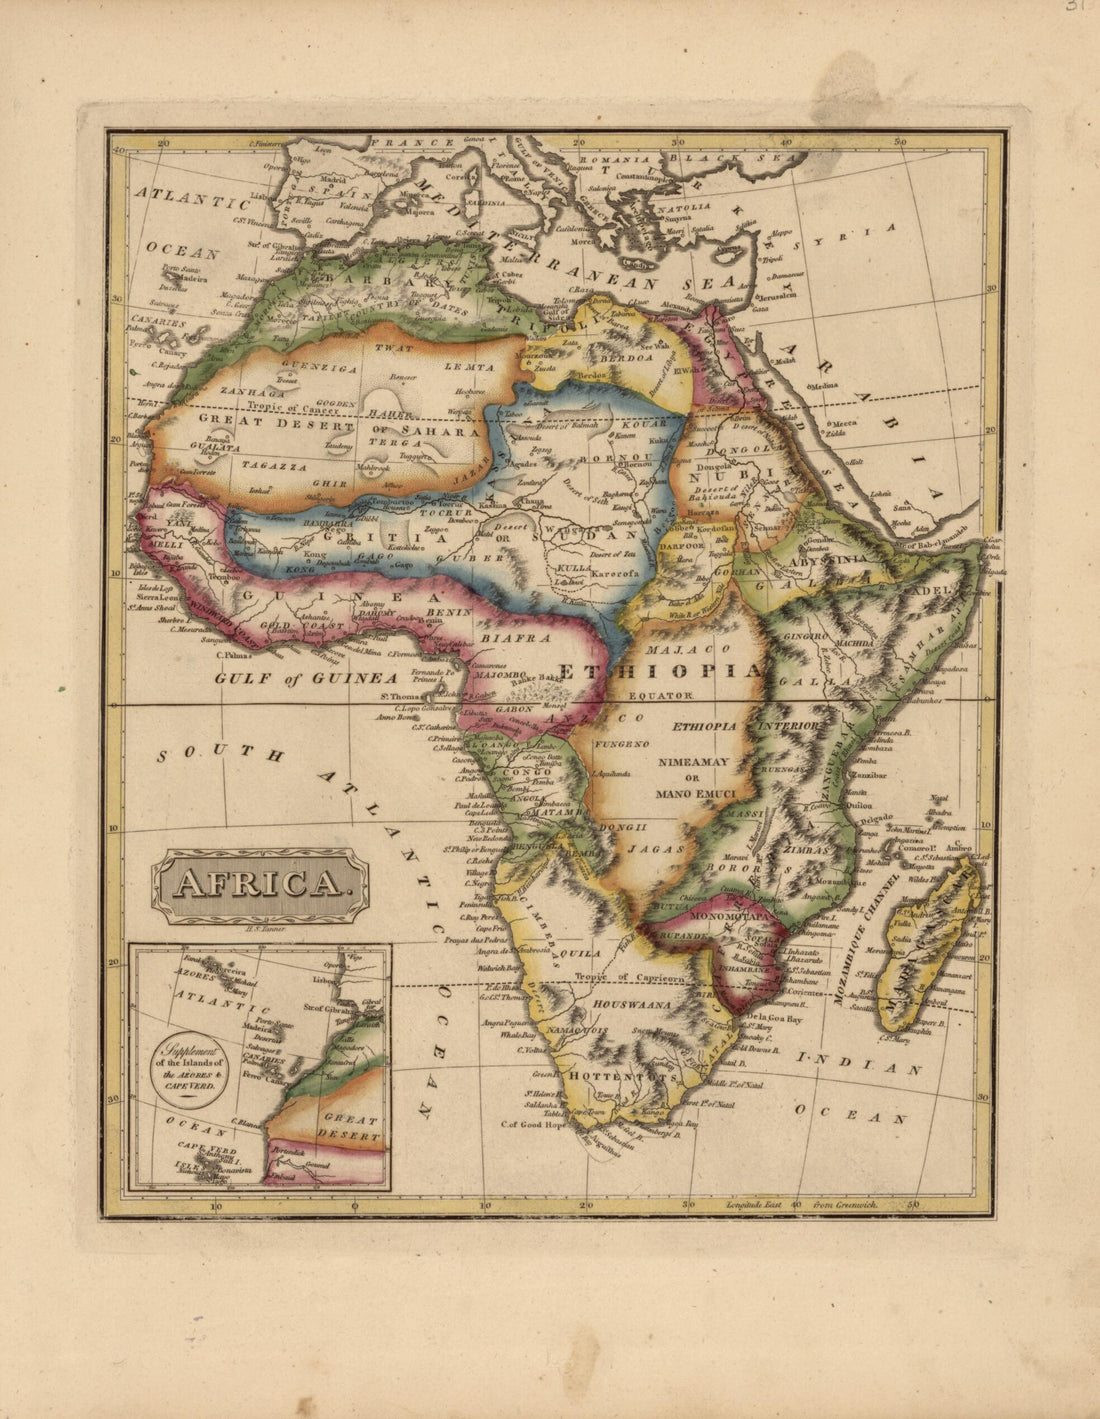 This old map of Africa from a New and Elegant General Atlas, Containing Maps of Each of the United States  from 1817 was created by Henry Schenck Tanner in 1817